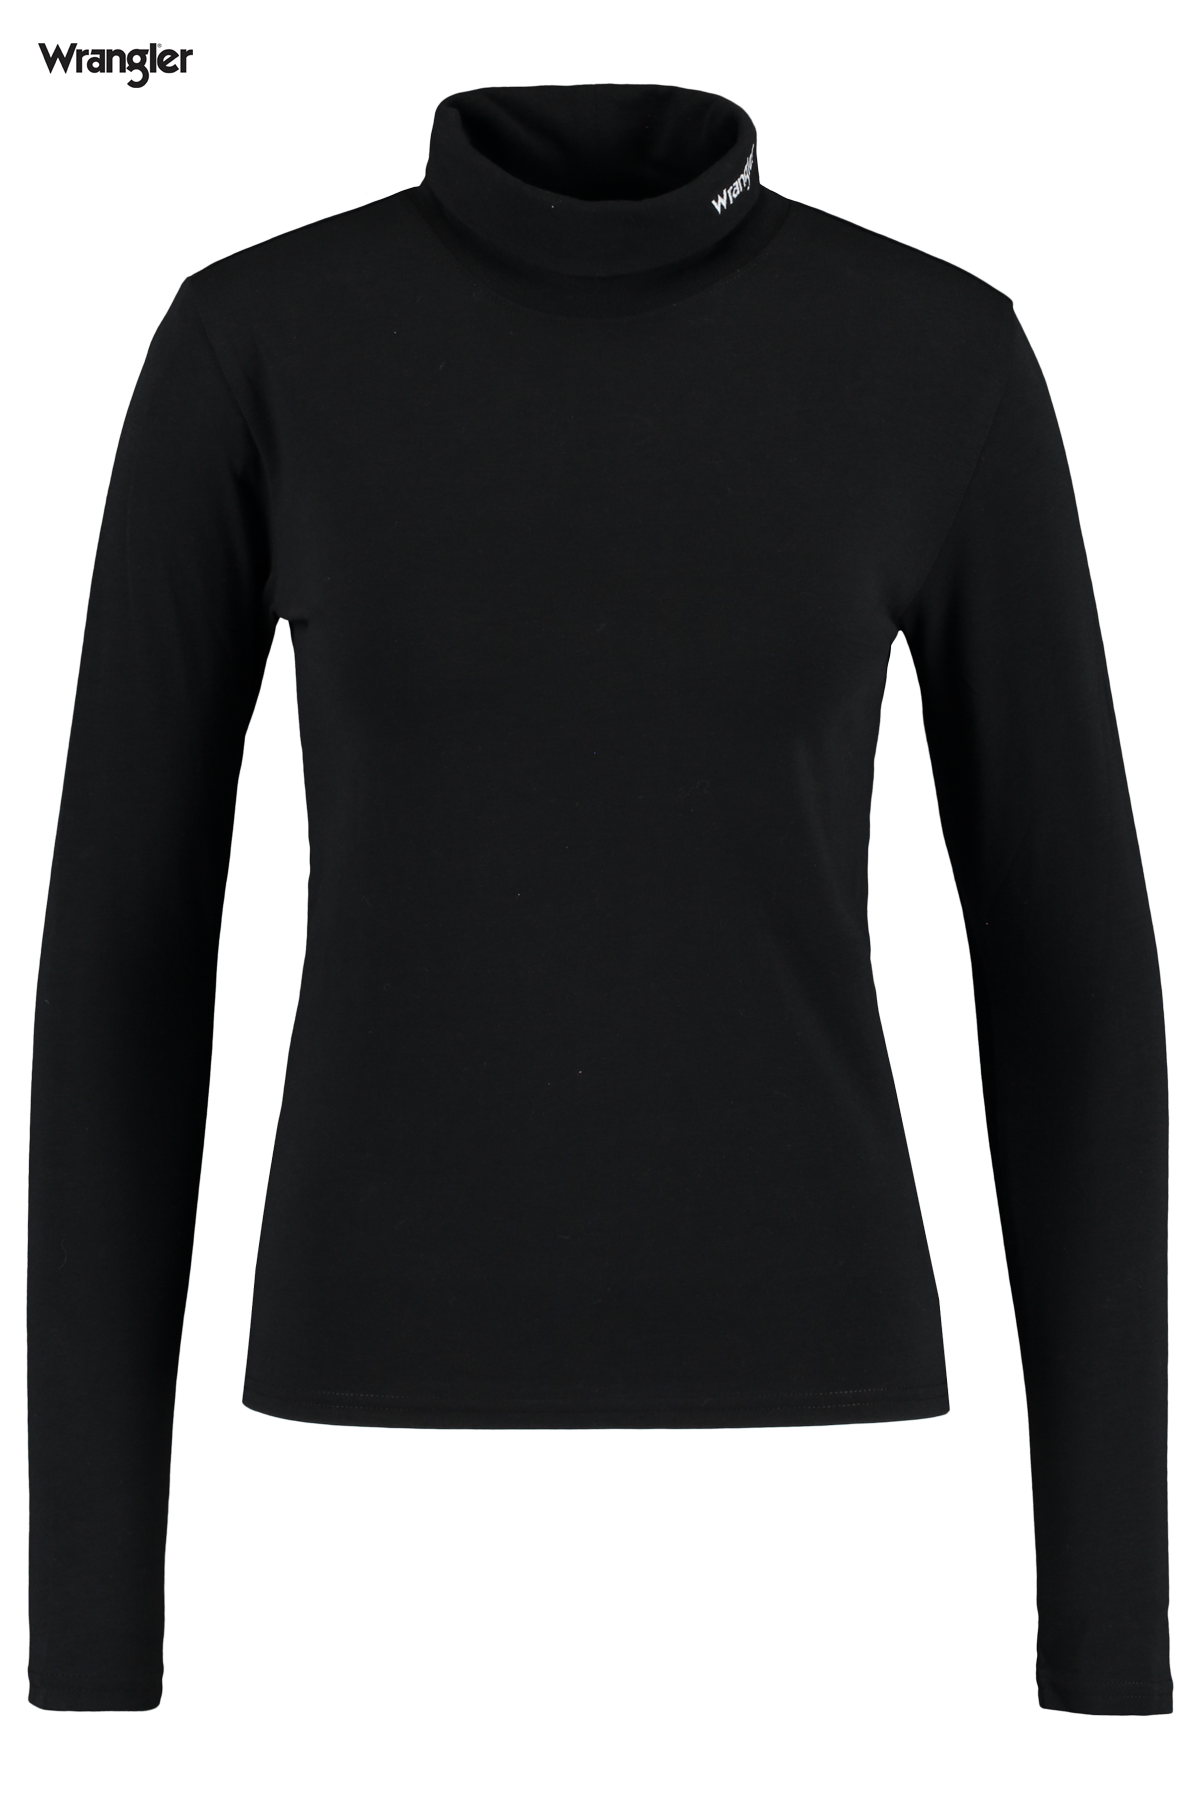 Turtle Neck Shirt PNG Clipart